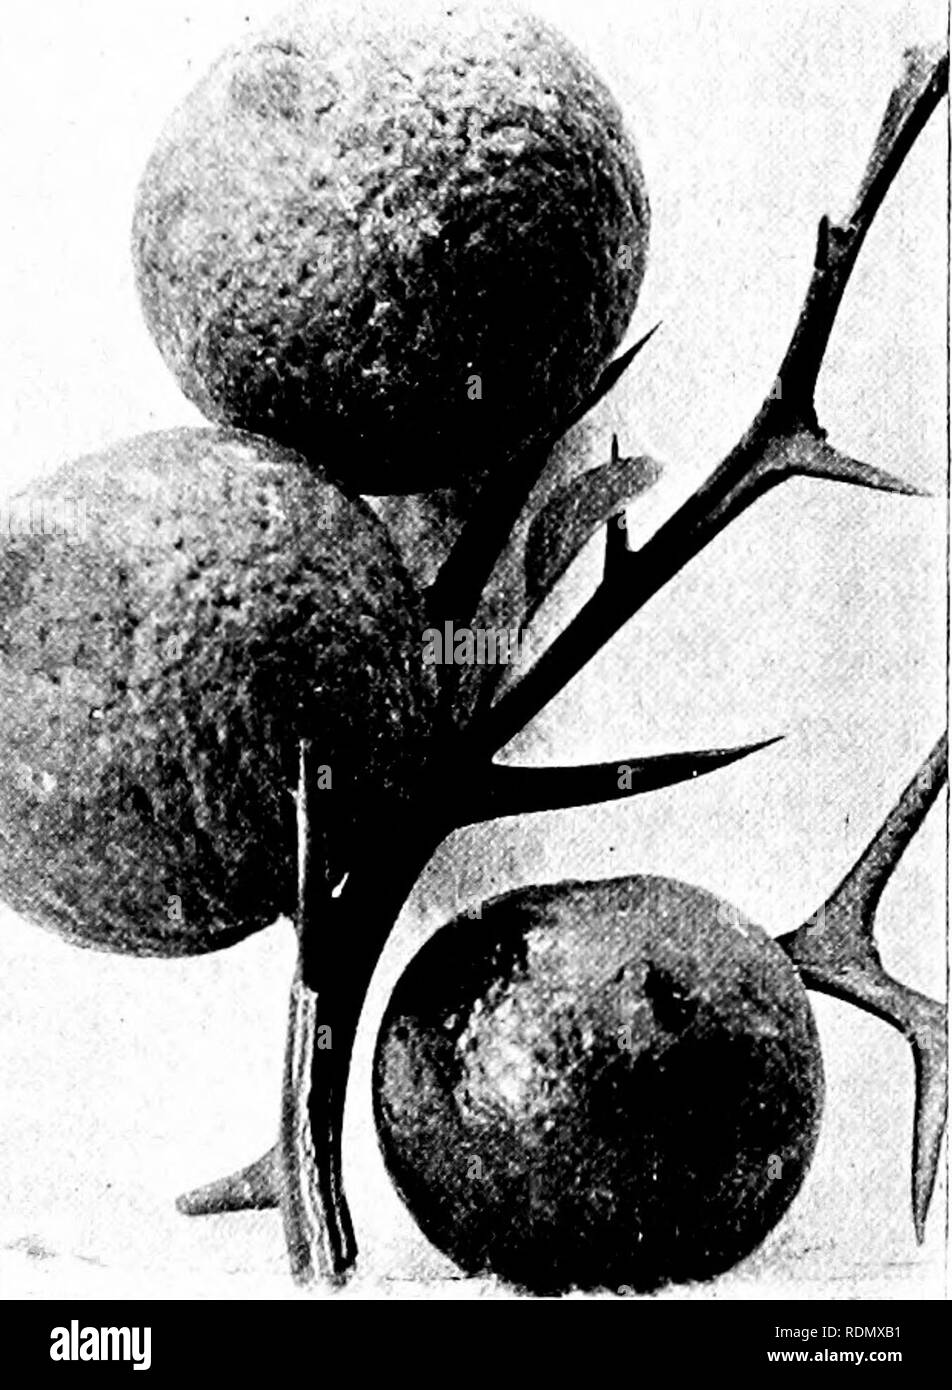 . Culture of the citrus in California. Citrus fruits; Fruit-culture. THE ORANGE IN CALIFORNIA—VARIETIES. 83 DECIDUOUS ORANGE. Citrus mu-antium, var. TriJ'oUata, Linn. A hardy deciduous species from Japan.. Early in the fall it sheds its leaves and becomes entirely dor- mant, in which con- dition it passes the winter. The tree is very dwarf, of a shrub- by habit, and suitable for hedges and dwarf- ing varieties of oranges and lemons. Fruit orange yellow, spheri- cal, about one and one half inches in diame- ter. Leaves trifoliate, leaflets sessile, ellipti- cal, obtuse, on a wing- ed petiole. Br Stock Photo